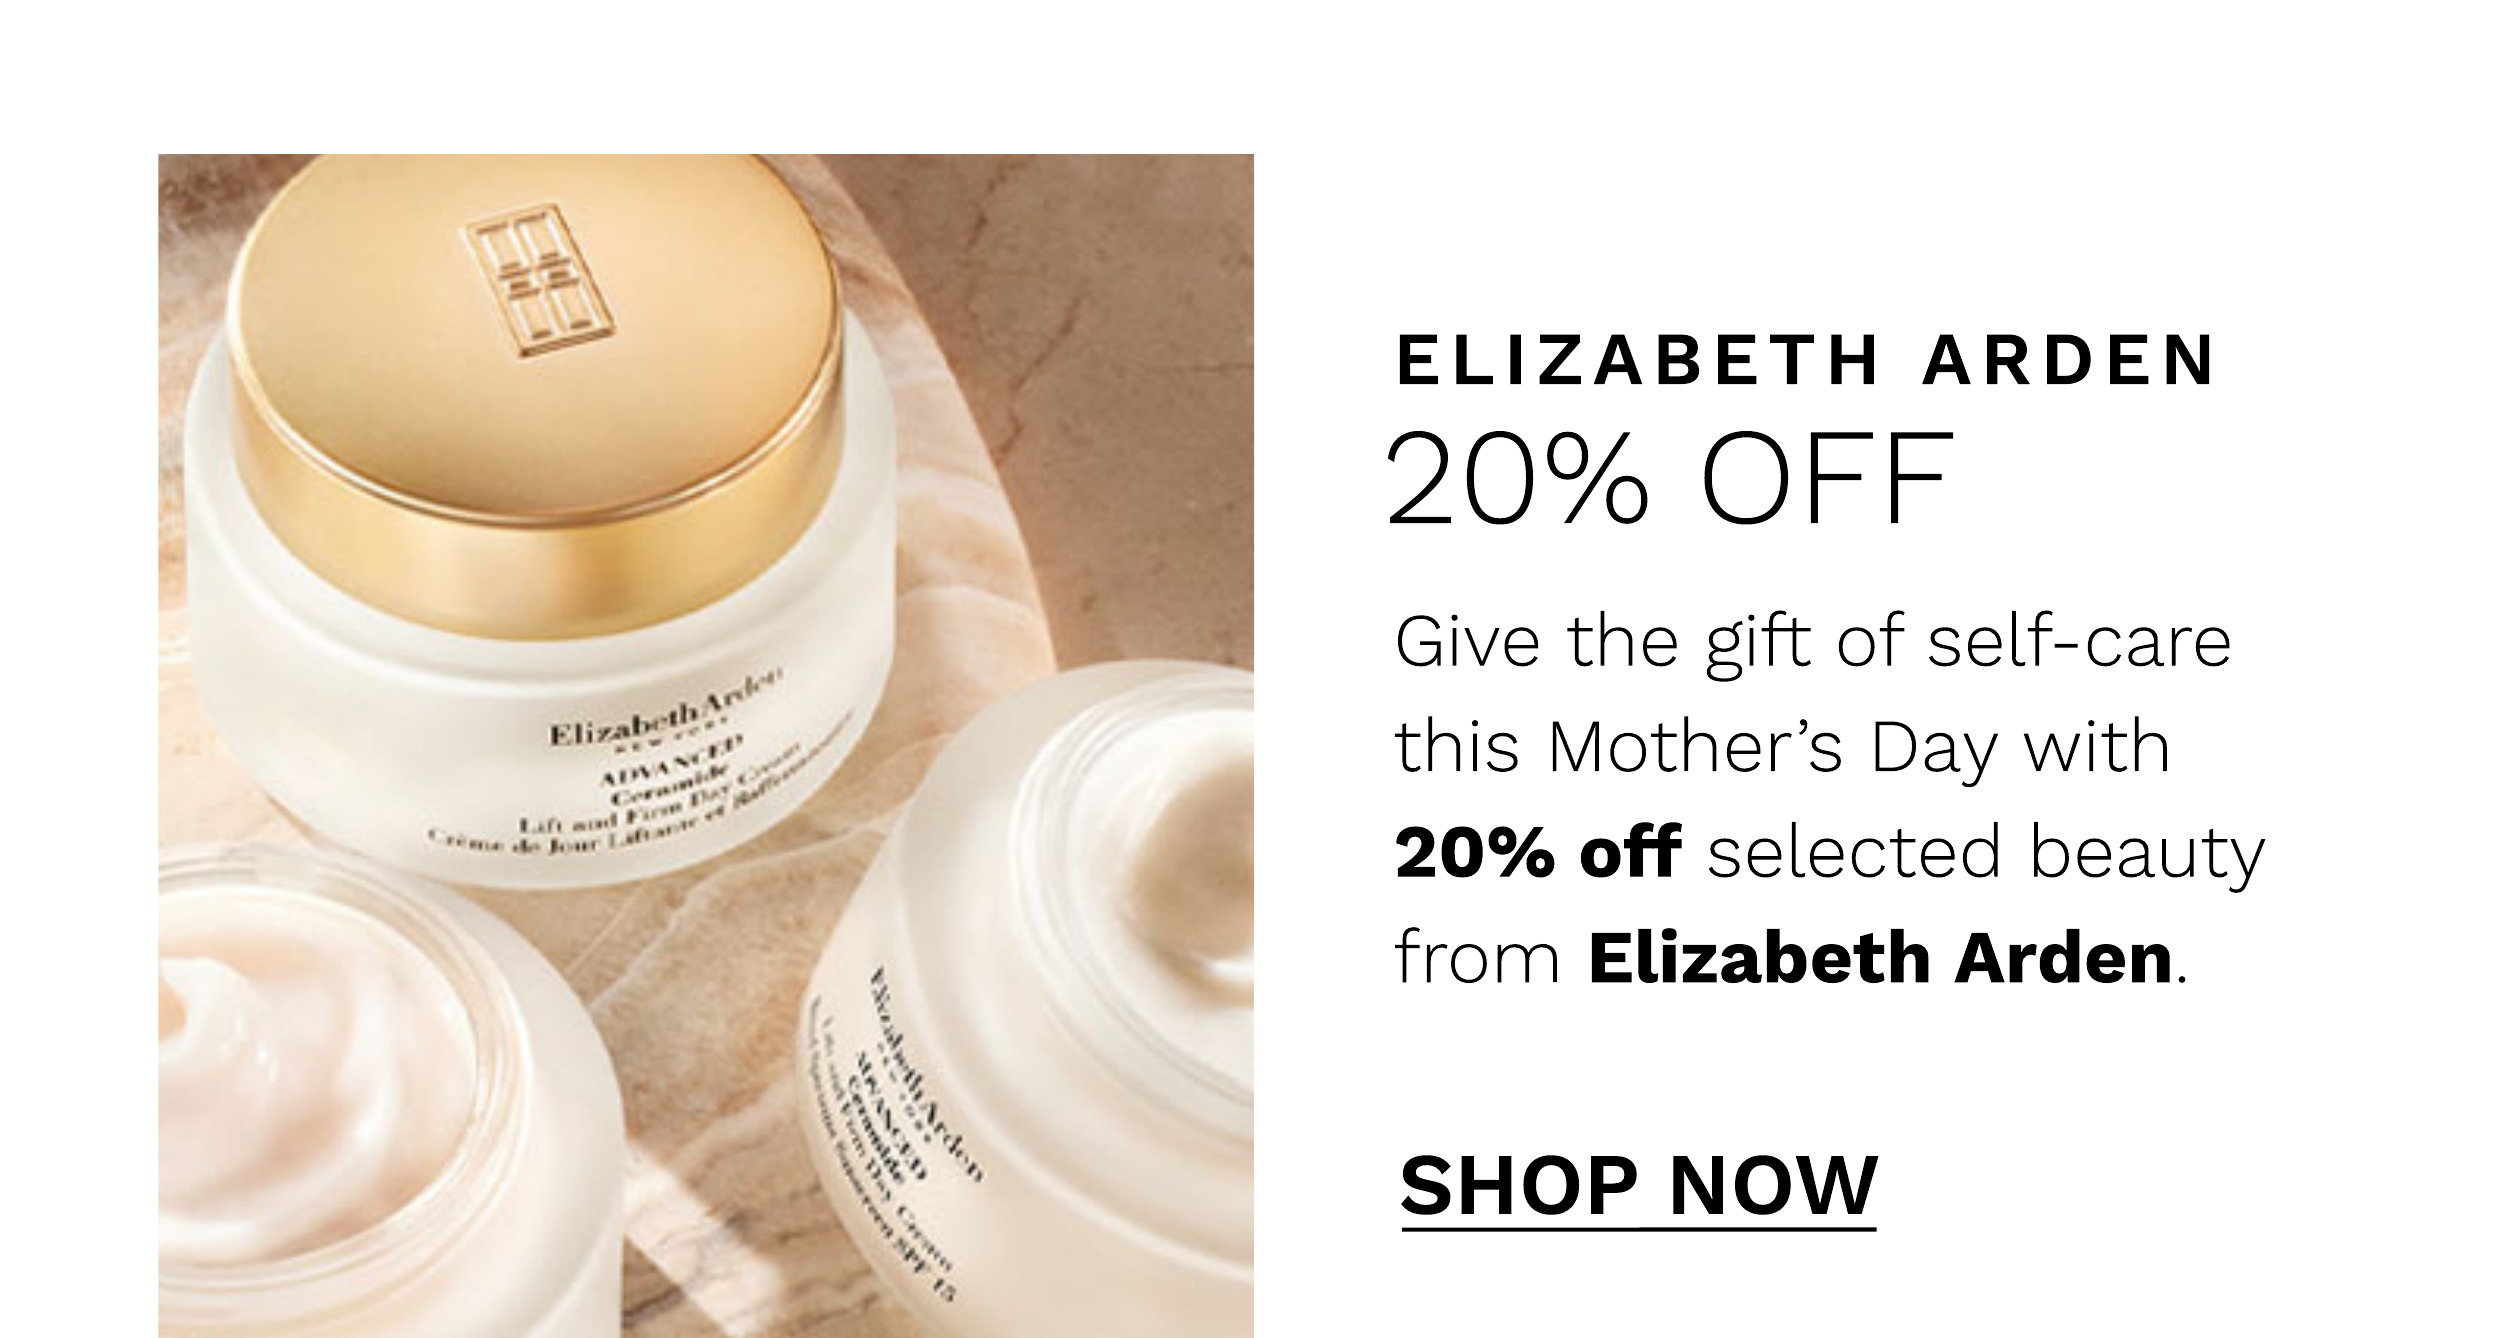  ELIZABETH ARDEN 20% OFF Give the gift of self-care this Mothers Day with 20% off selected beauty from Elizabeth Arden. SHOP NOW 